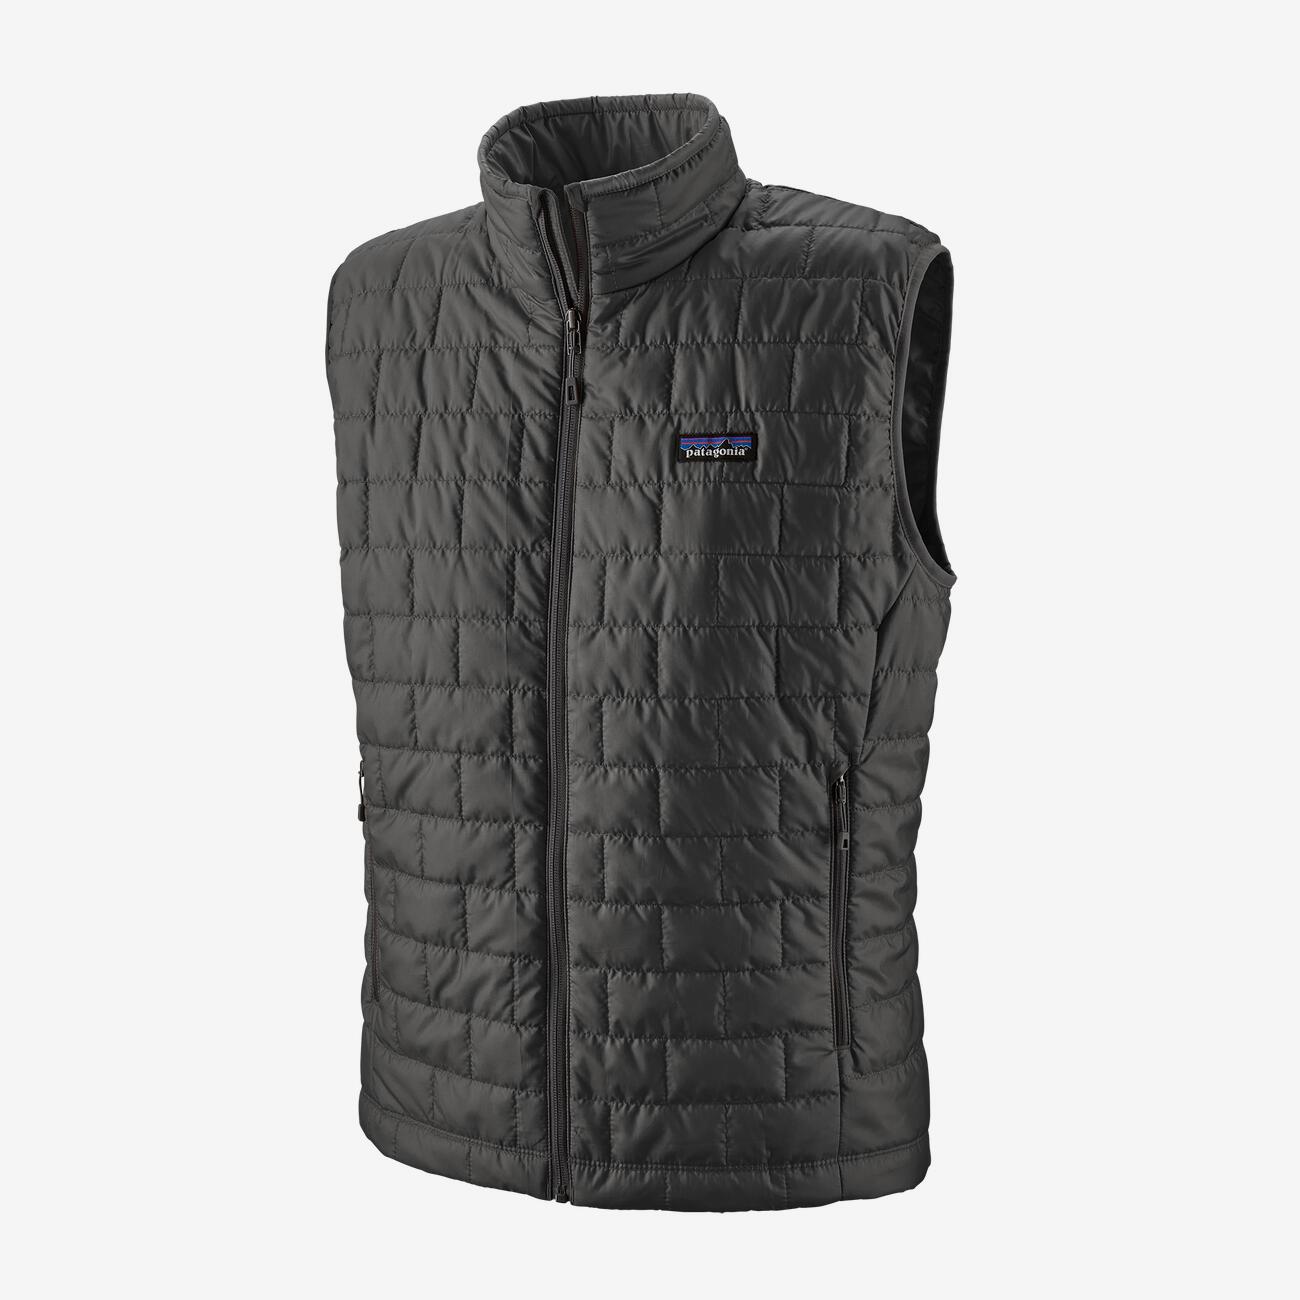 Patagonia Men's Nano Puff Vest-MENS CLOTHING-Forge Grey-S-Kevin's Fine Outdoor Gear & Apparel